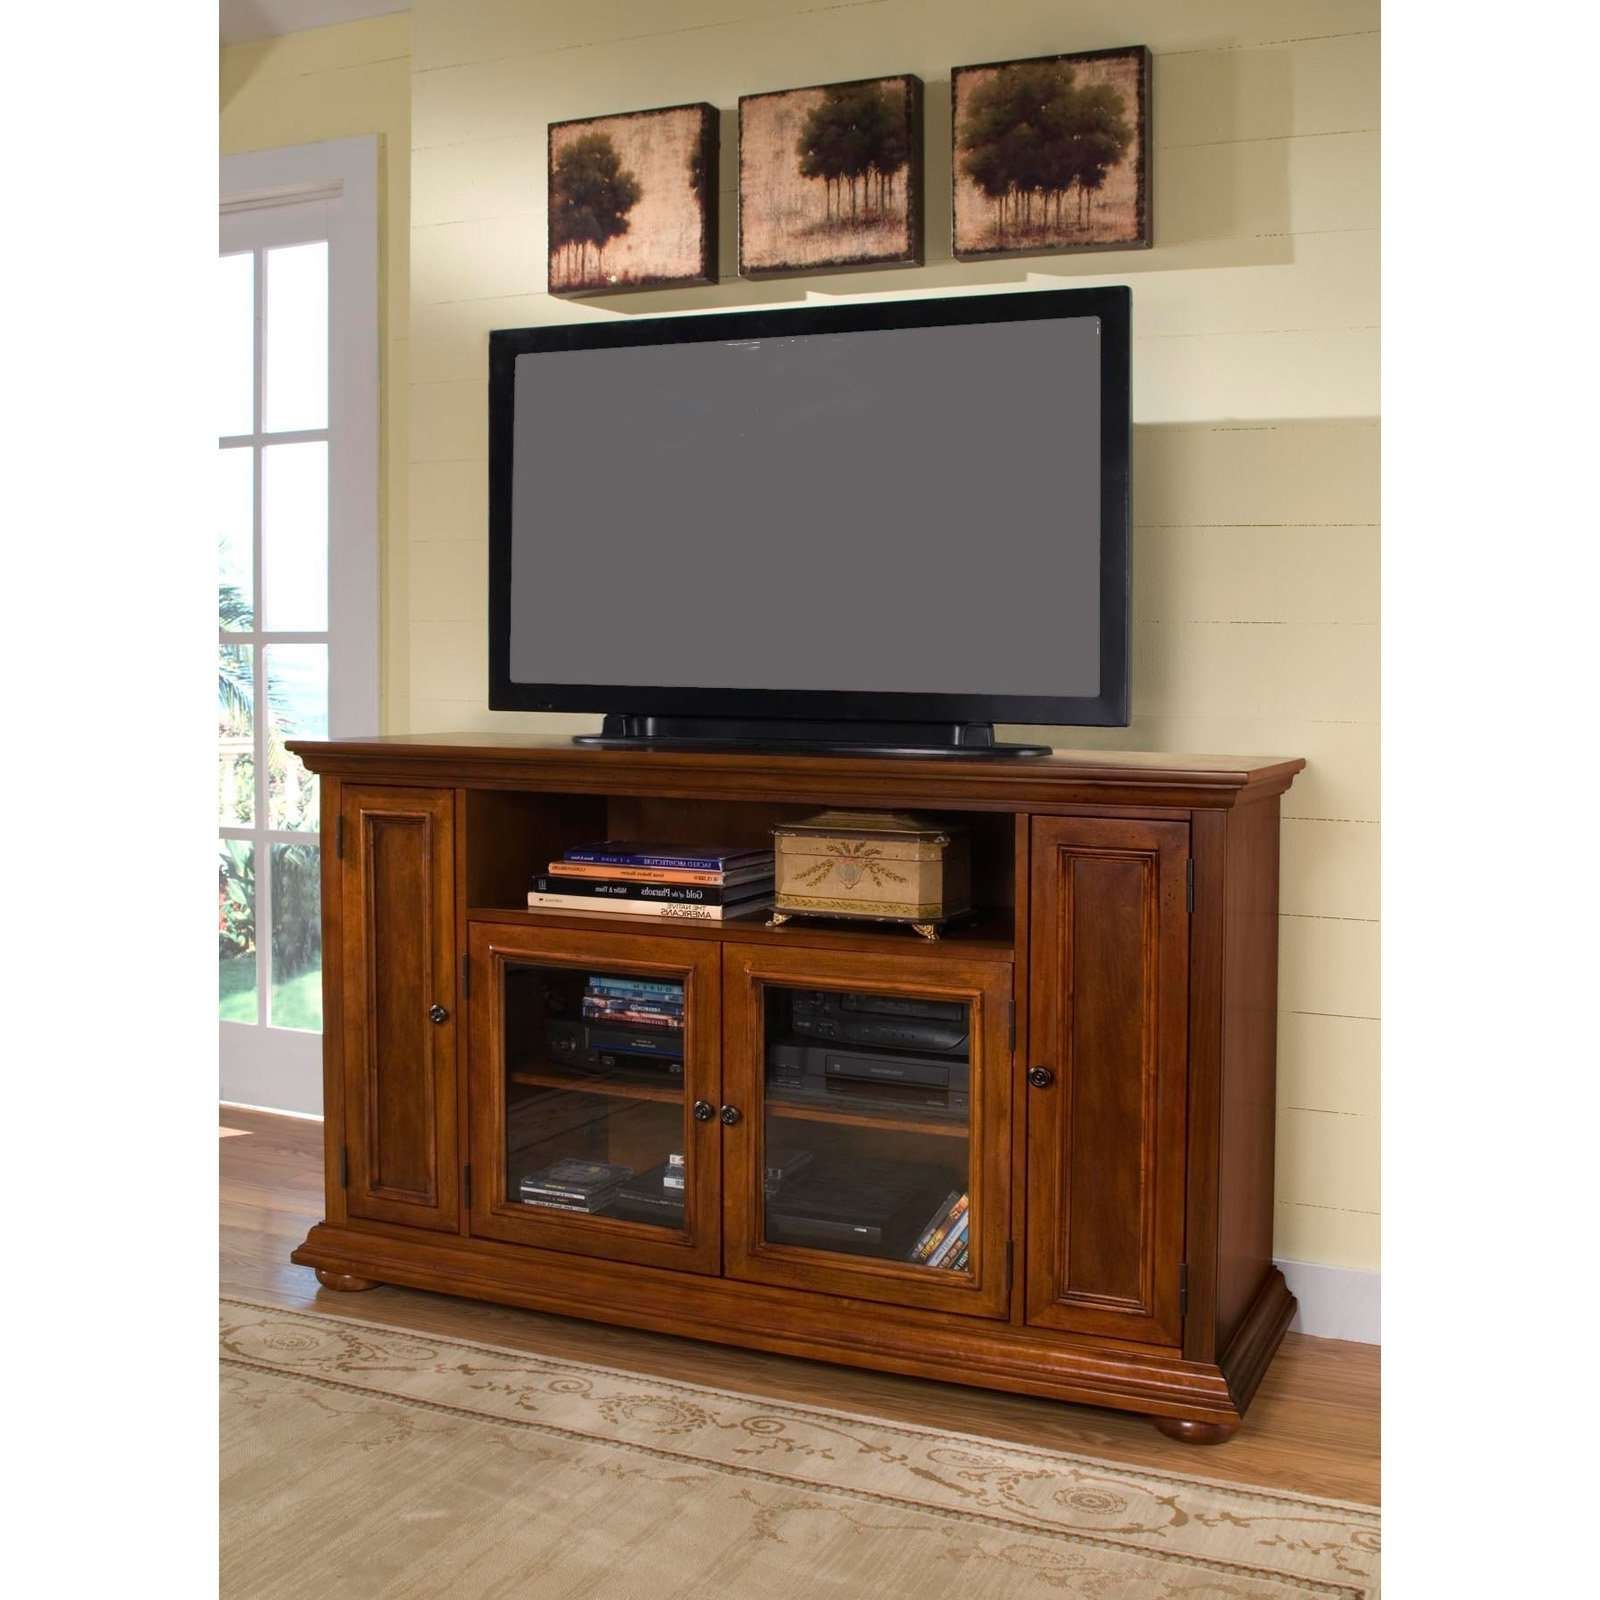 Brown Oak Tv Cabinet With Doors And Glass Doors On The Floor Pertaining To Oak Tv Cabinets For Flat Screens (View 3 of 20)